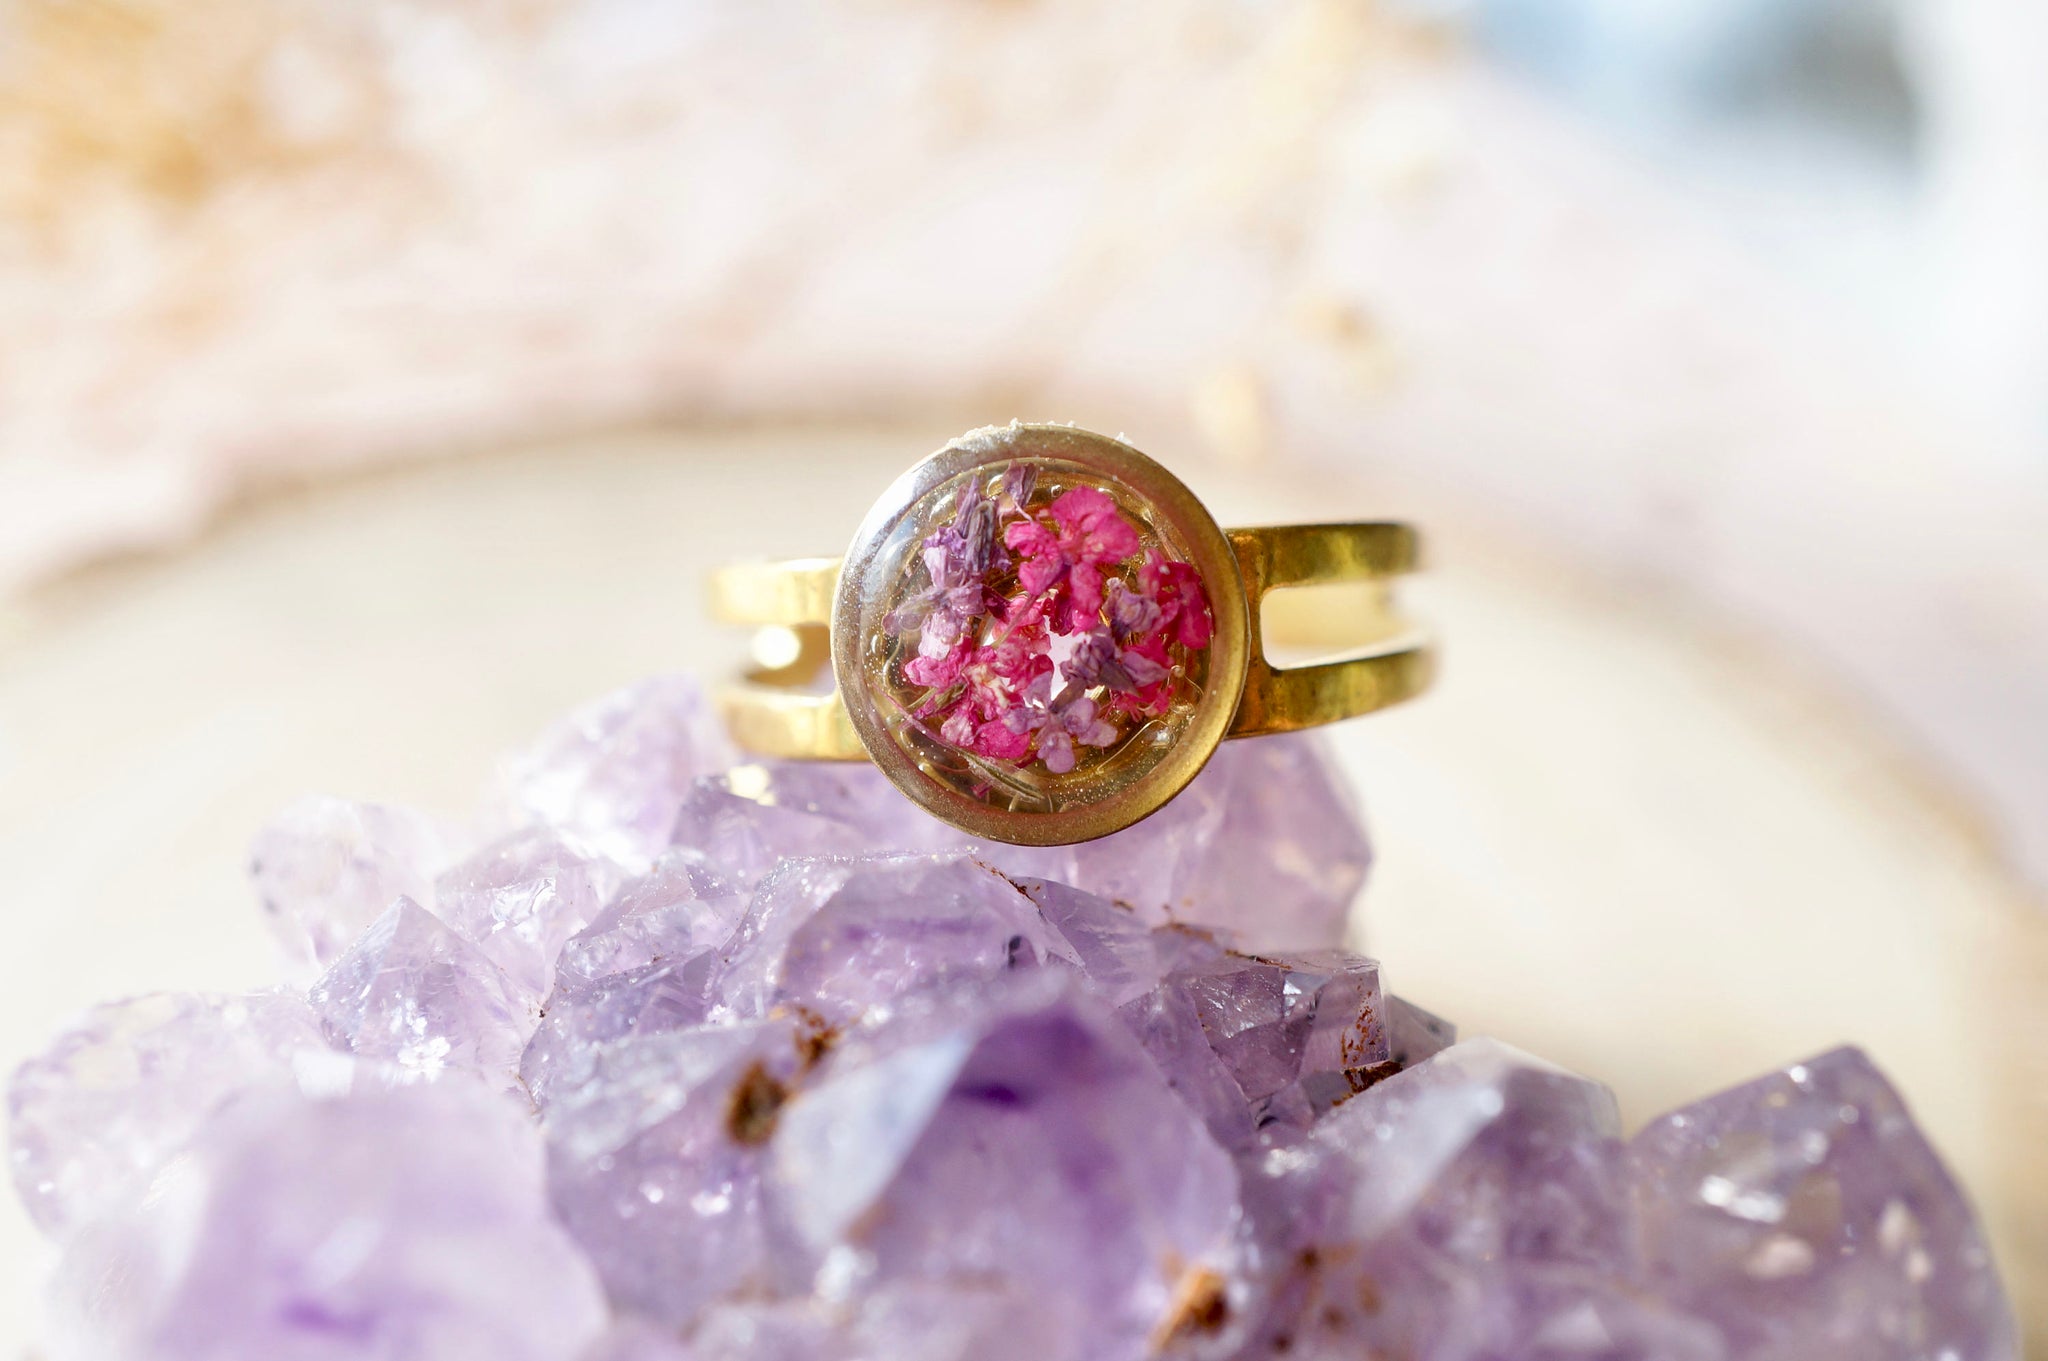 Real Heather Flower Faceted Resin Ring - Purity Ring for Her - Pressed Flower Jewelry